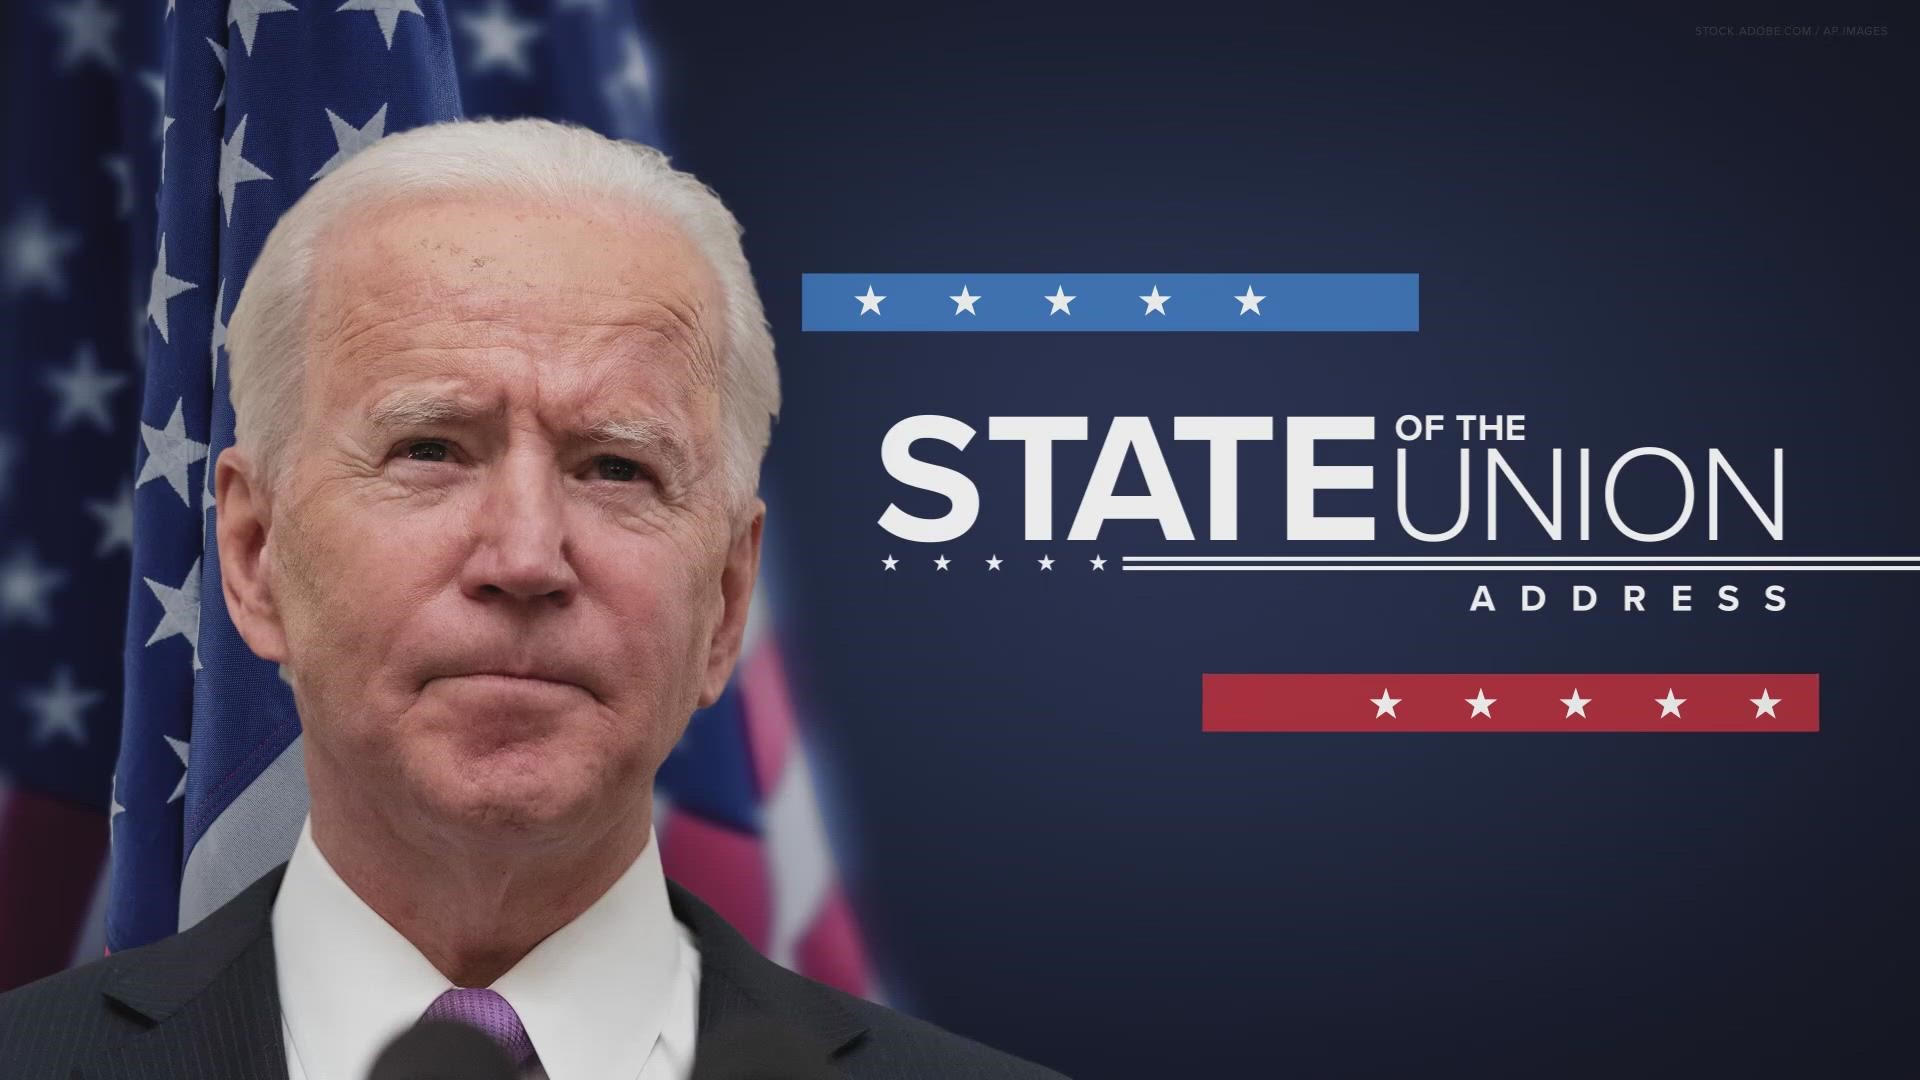 Some topics to watch for during President Joe Biden's State of the Union Address